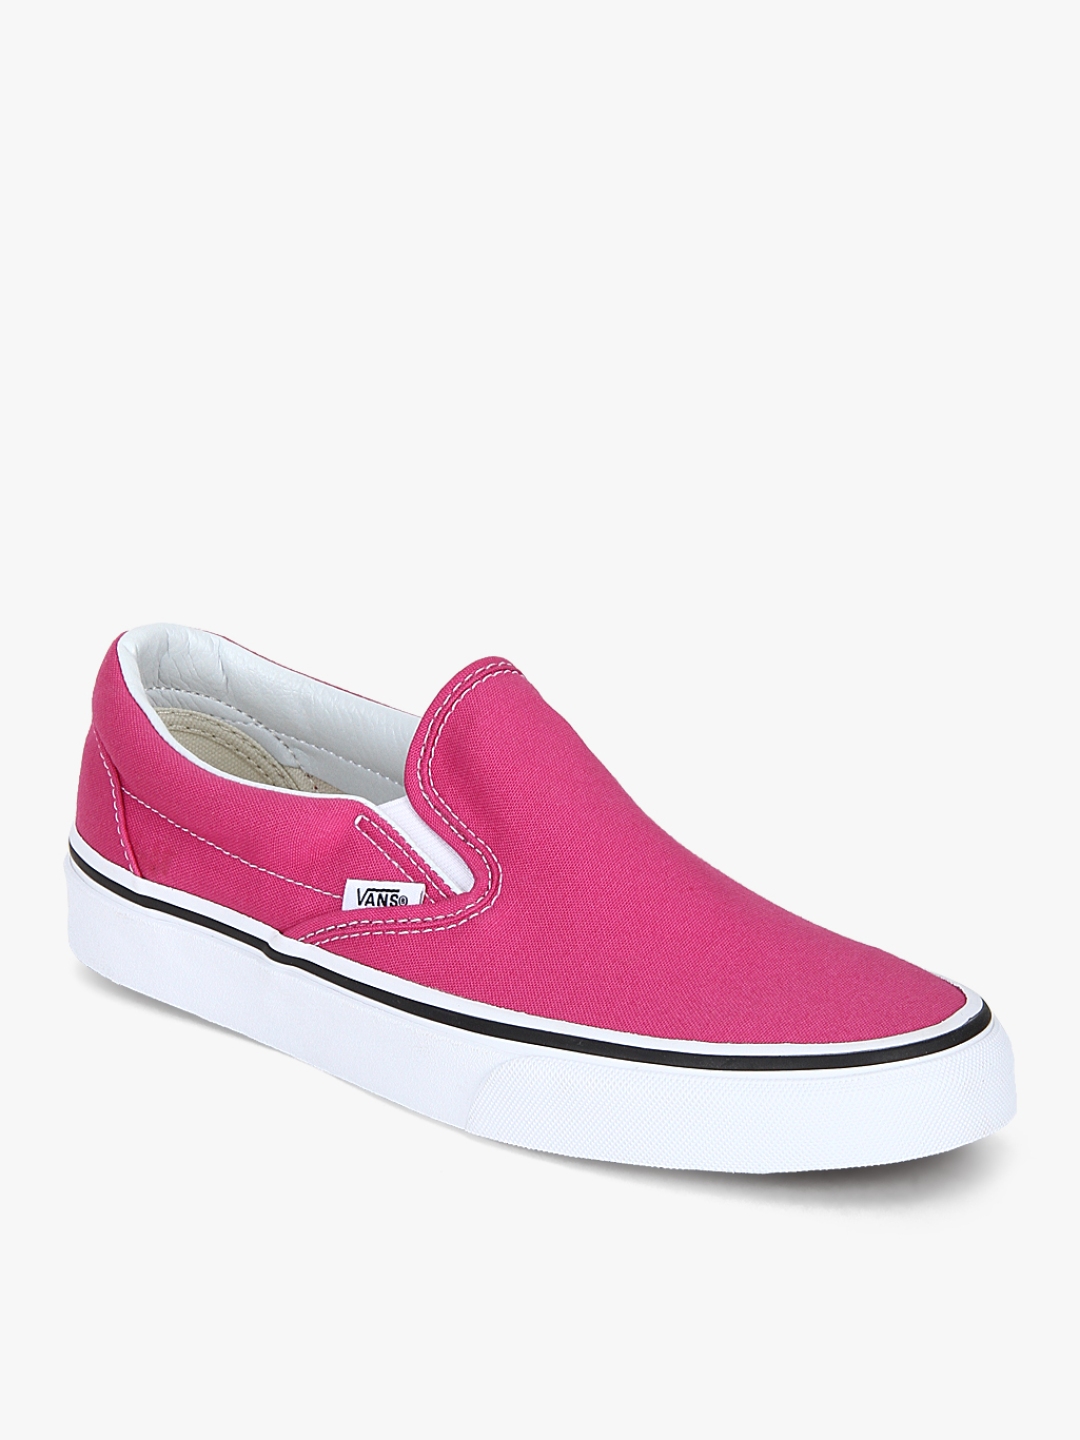 Buy Vans Unisex Pink Classic Slip On Sneakers Casual Shoes For Unisex